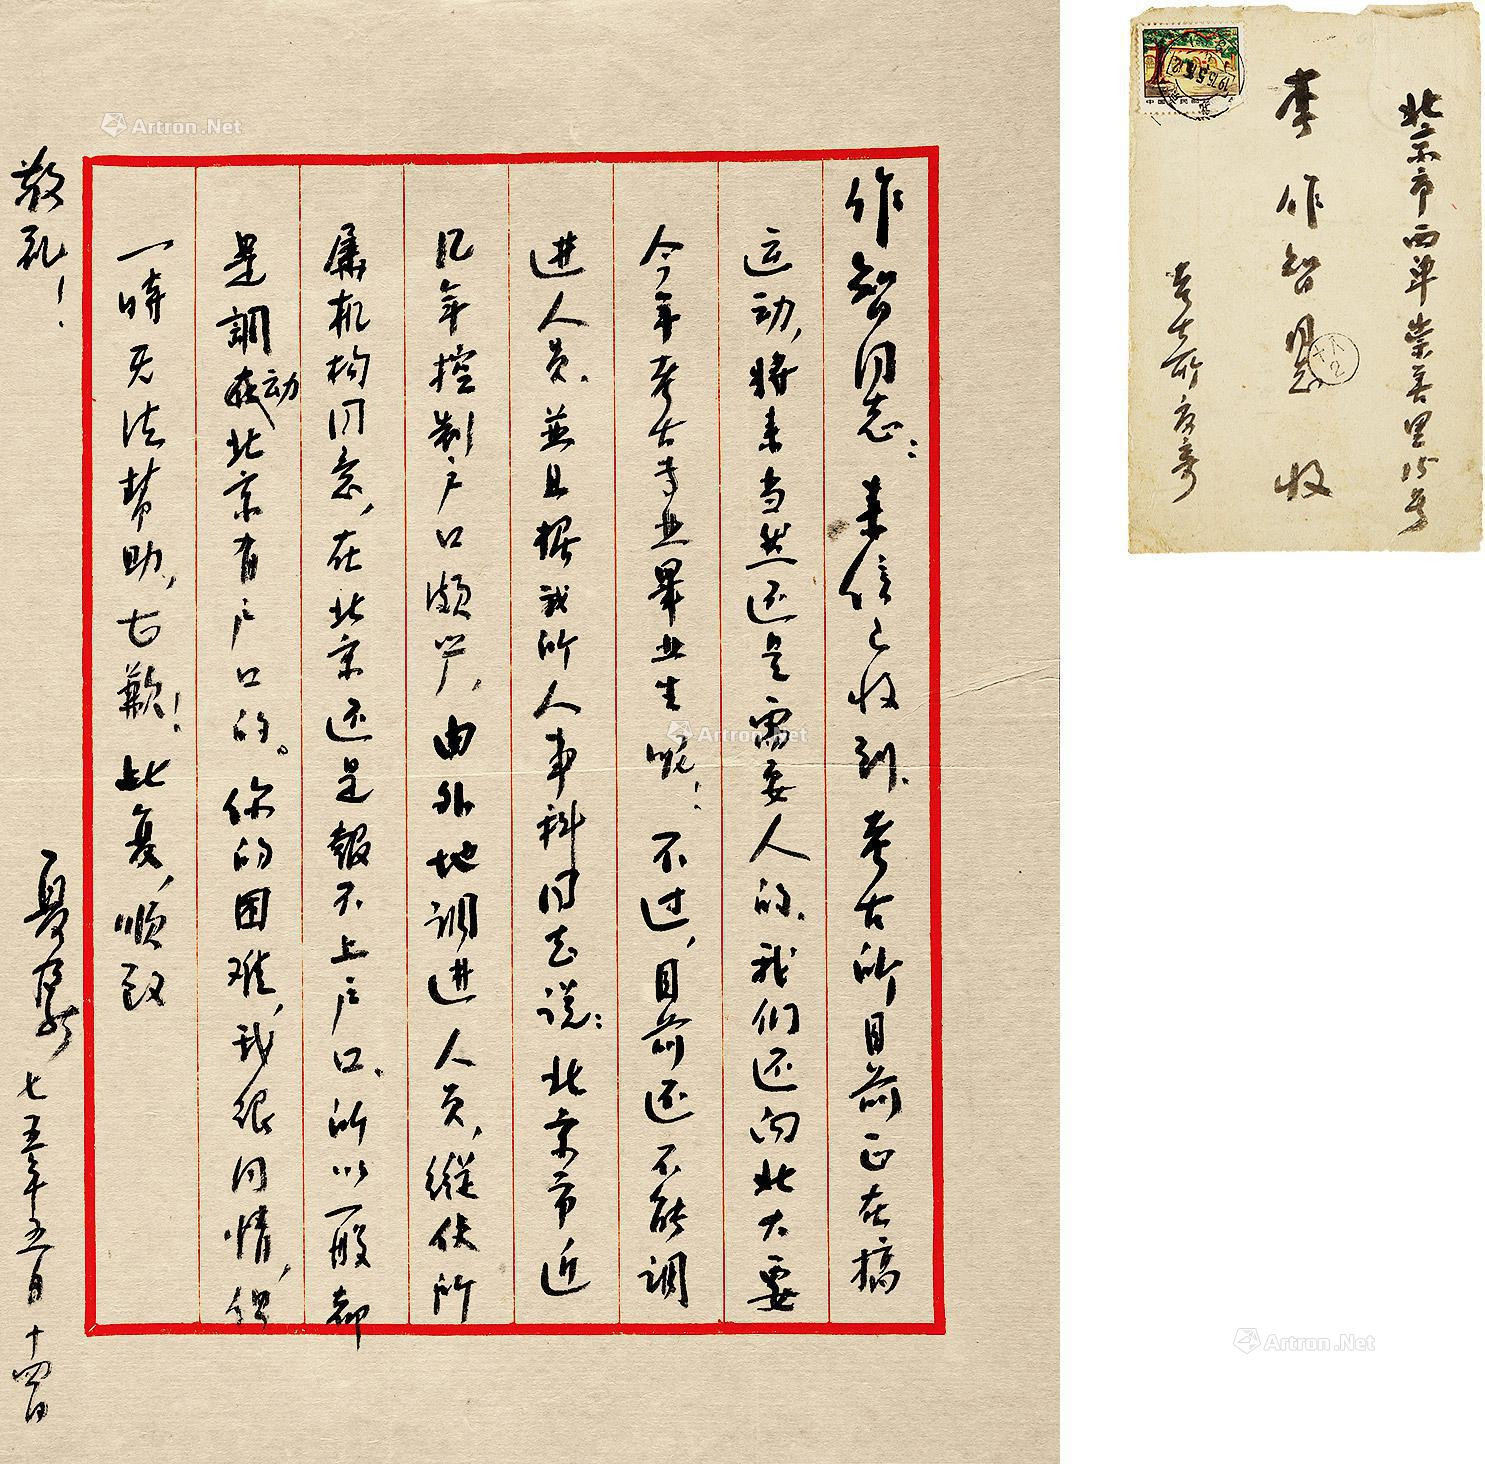 Letter of one page by Xia Nai， with original cover